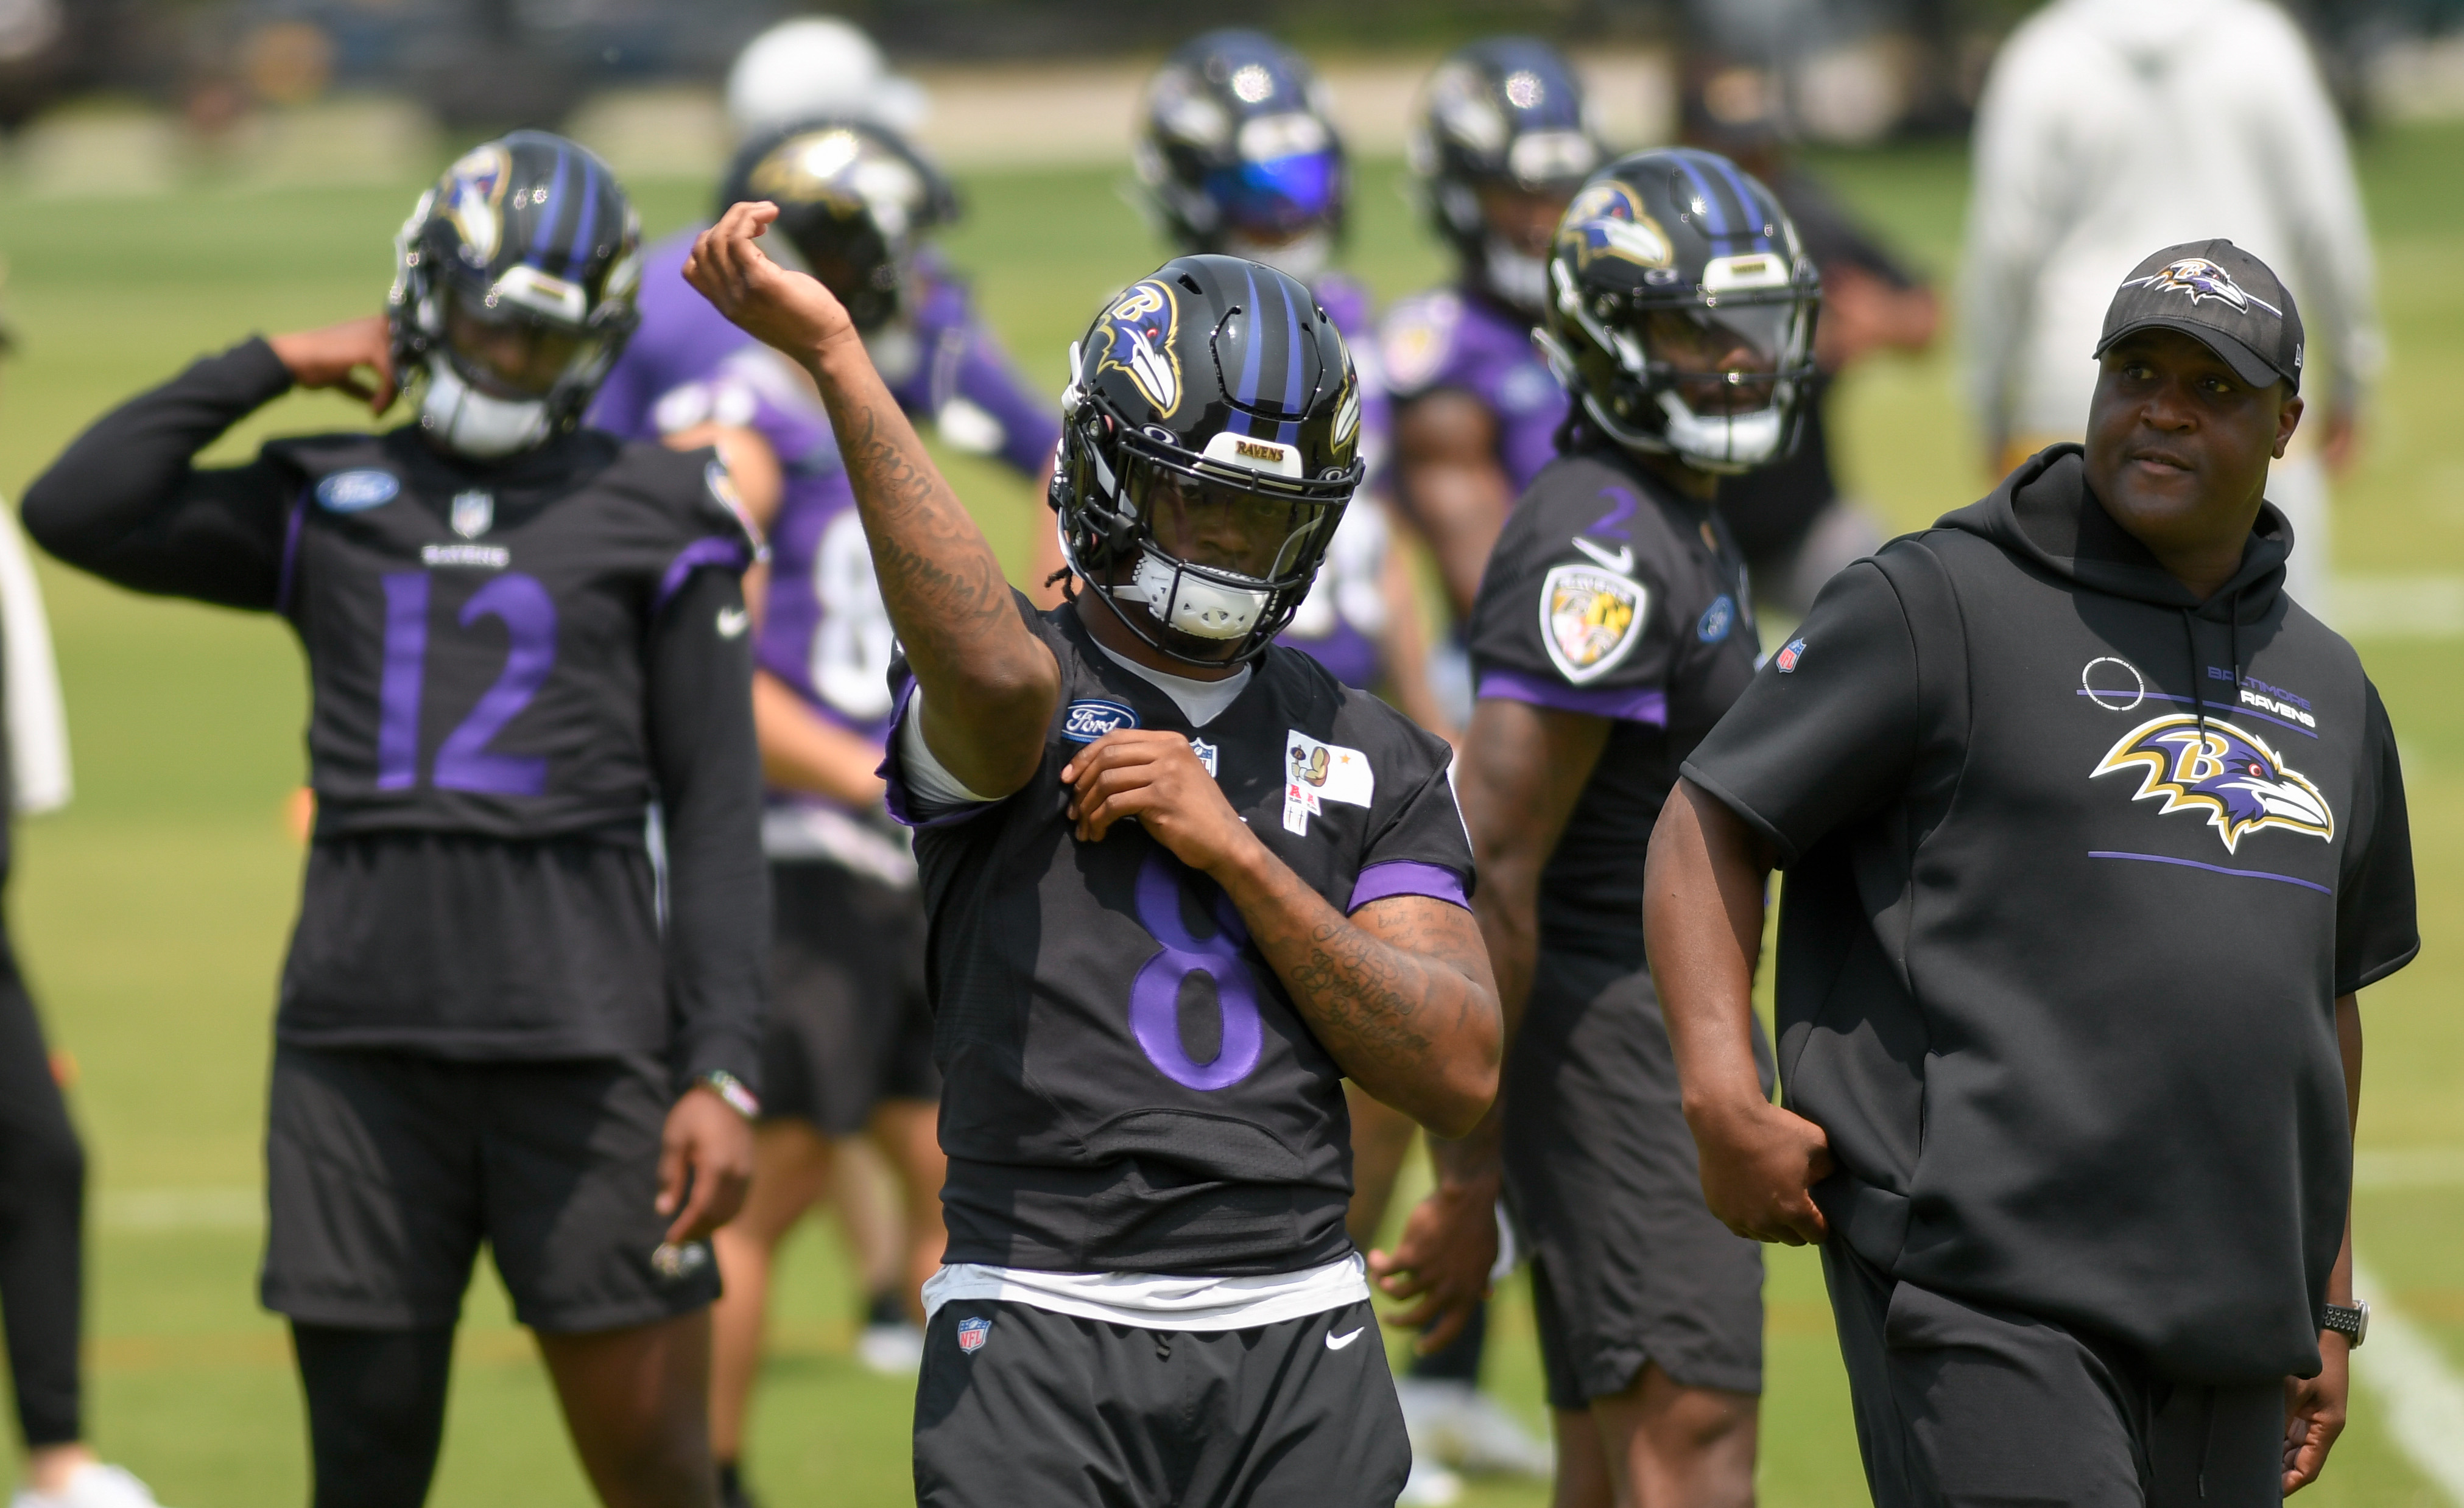 Ravens camp updates, Day 3: These shiny new QB jerseys have struck